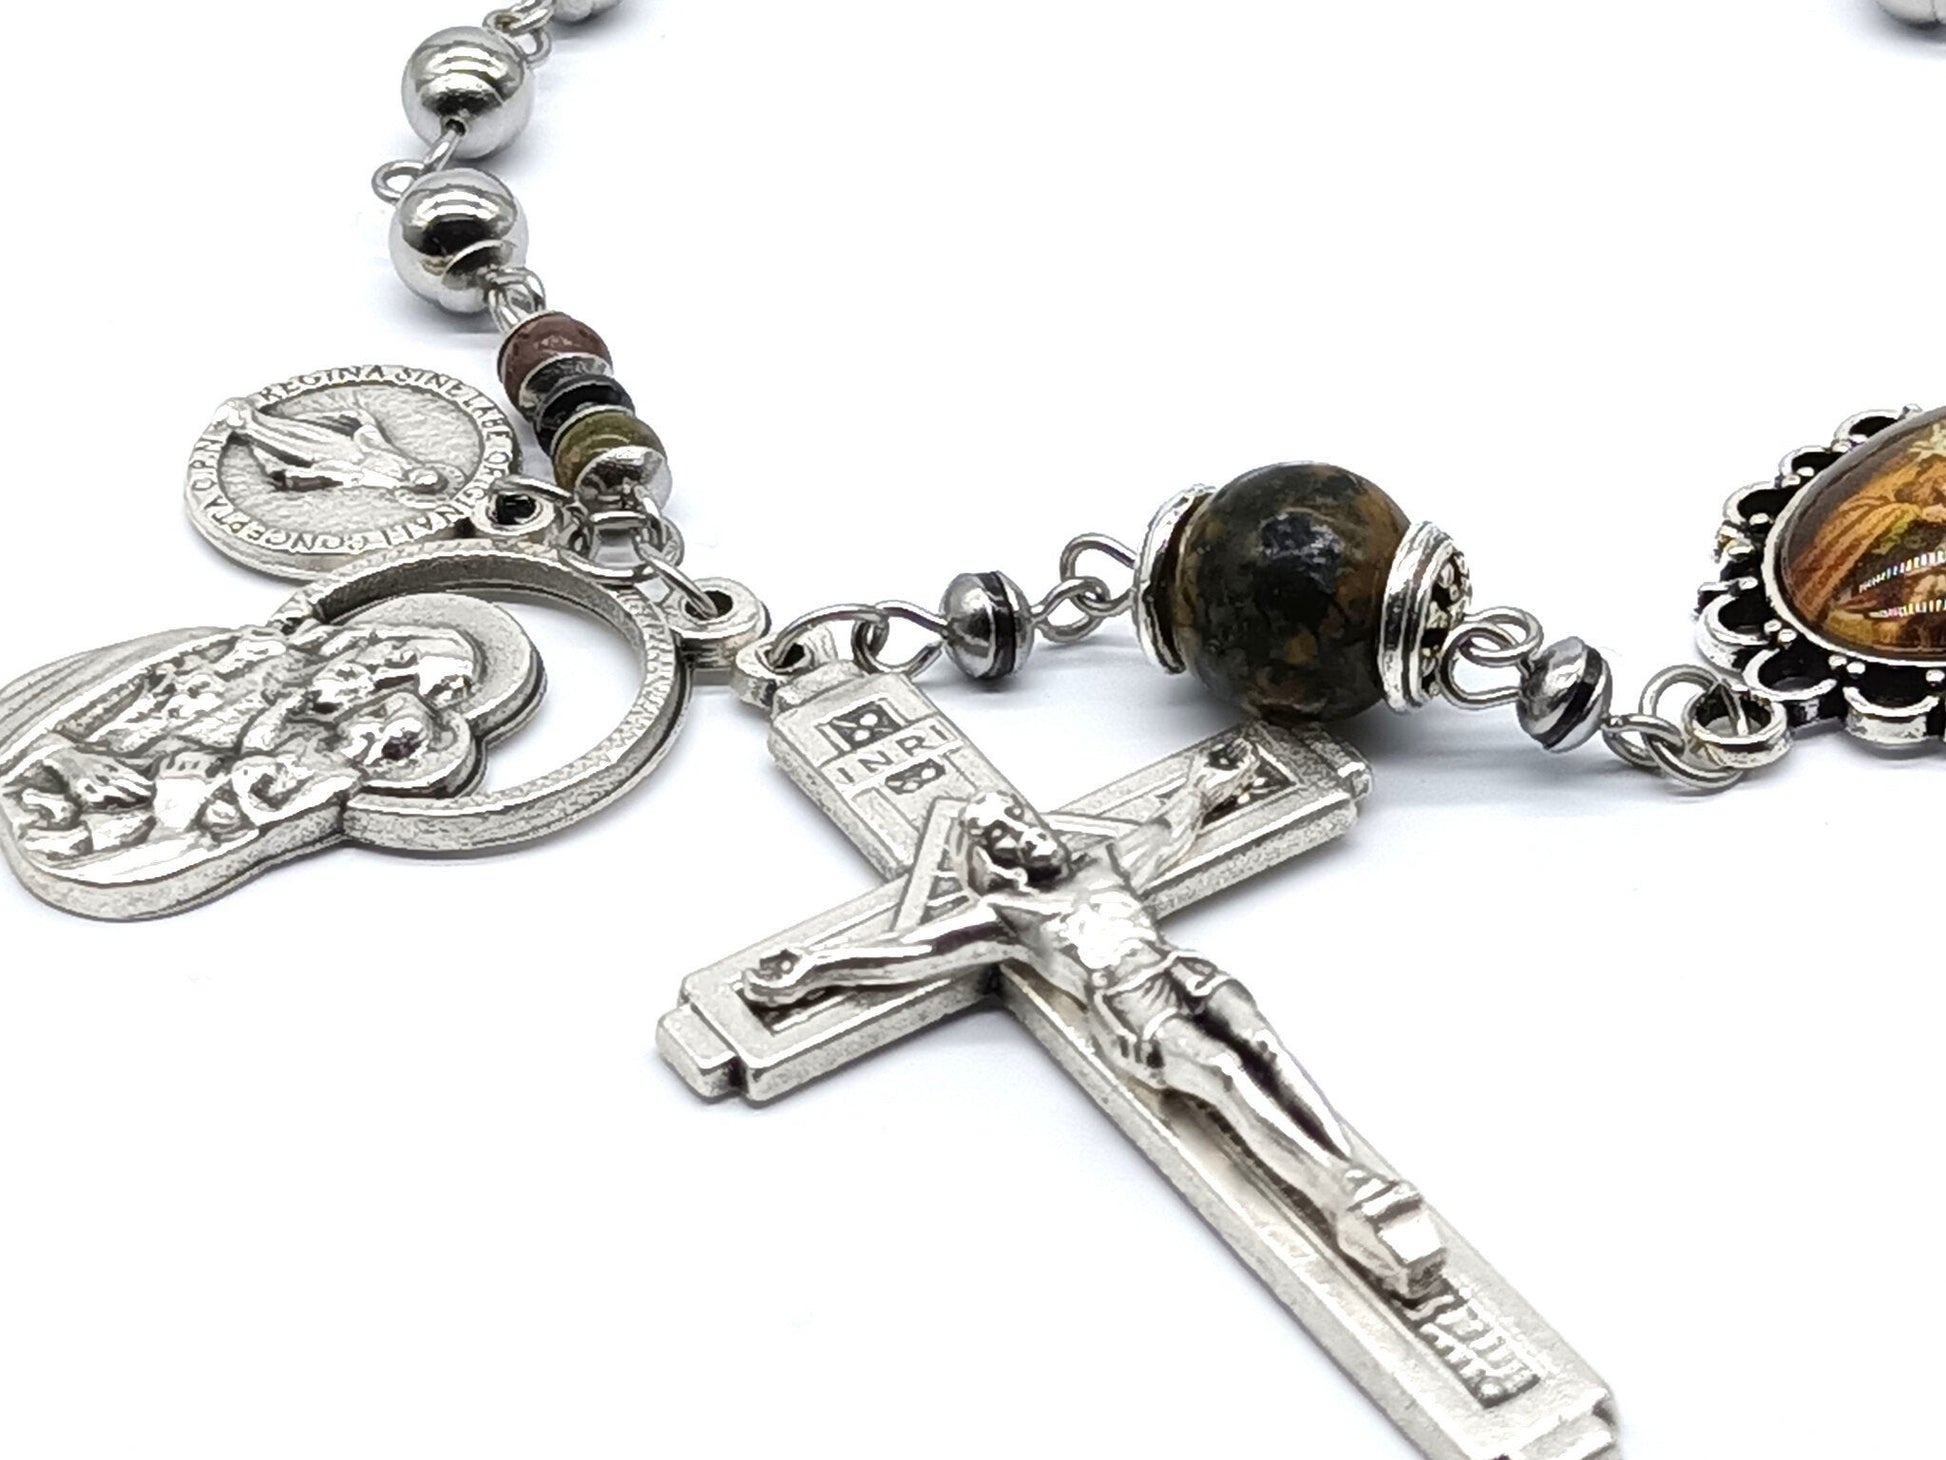 Saint Joseph unique rosary beads single decade with stainless steel beads, silver crucifix and St. Joseph picture medal.